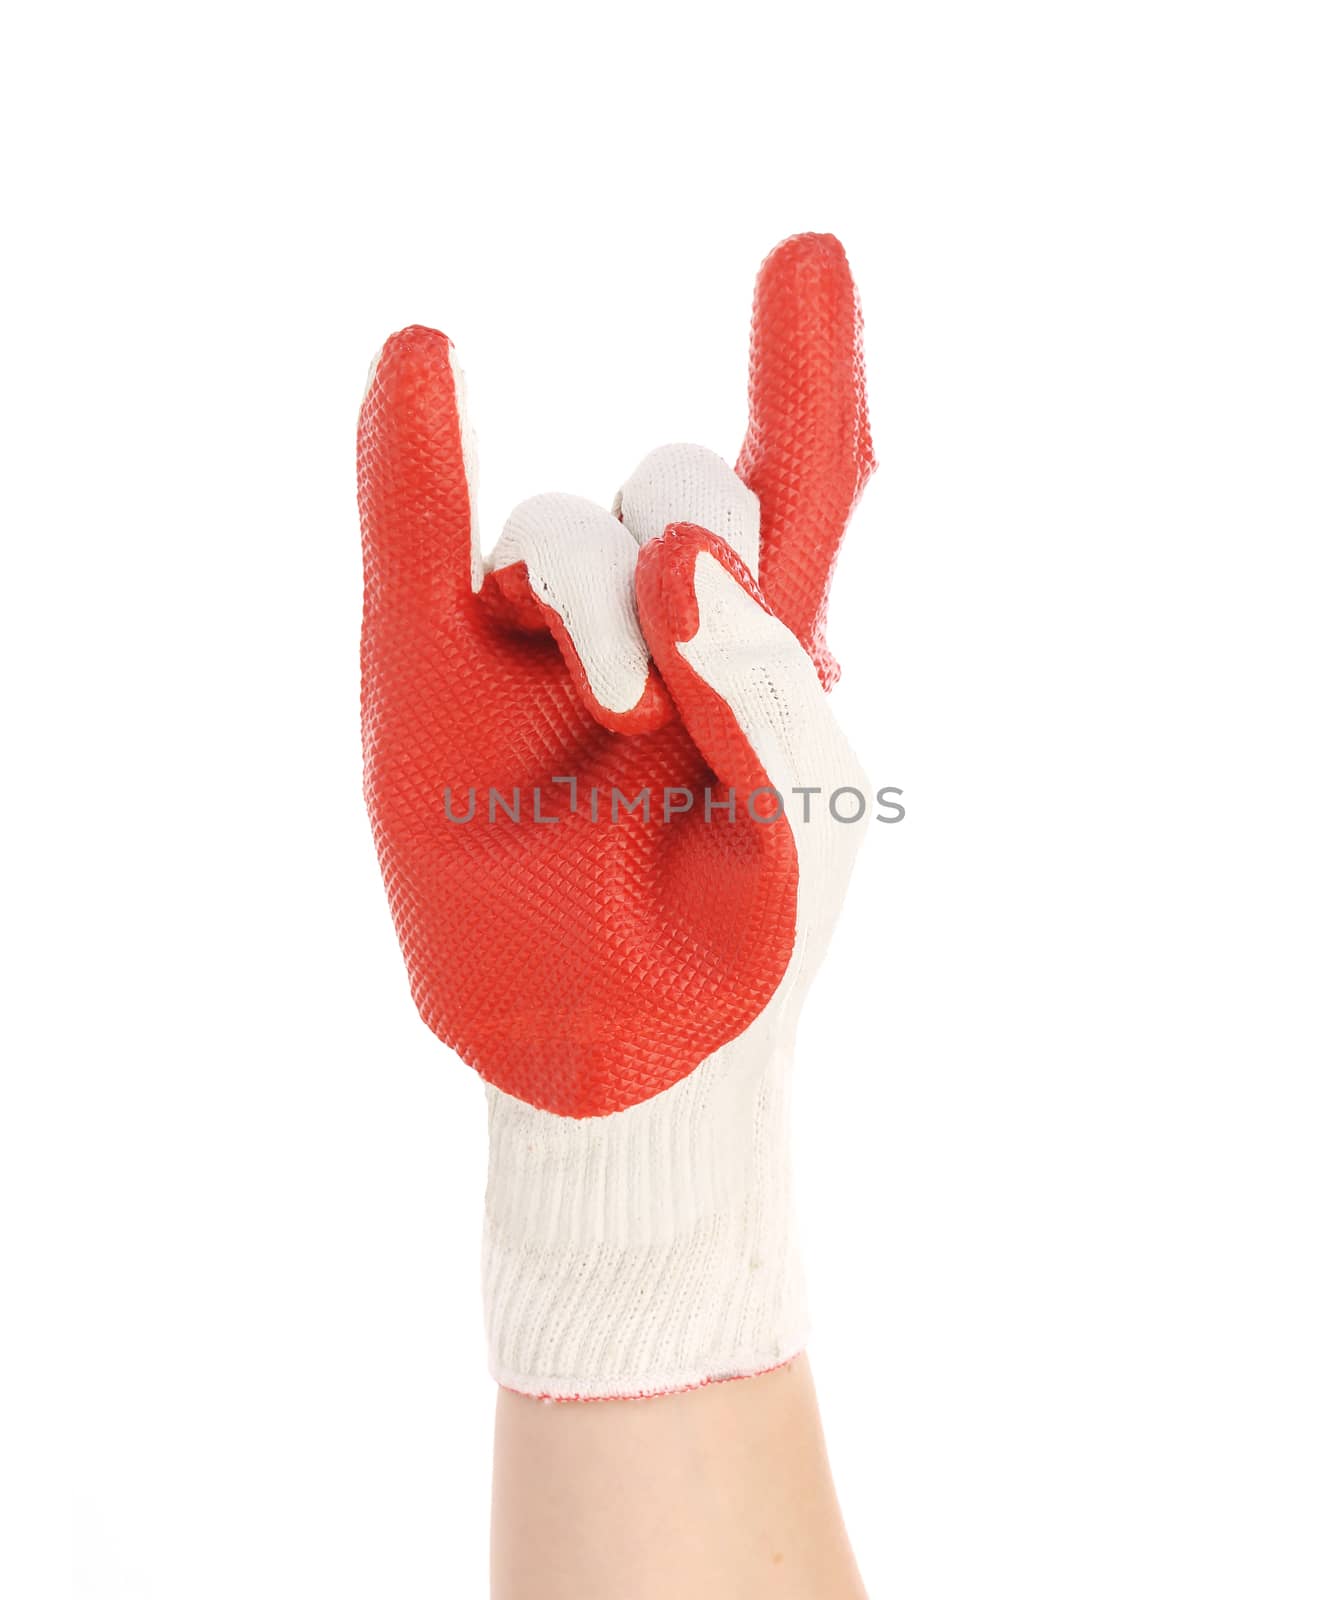 Hand in rubber glove shows rock sign. Isolated on a white background.